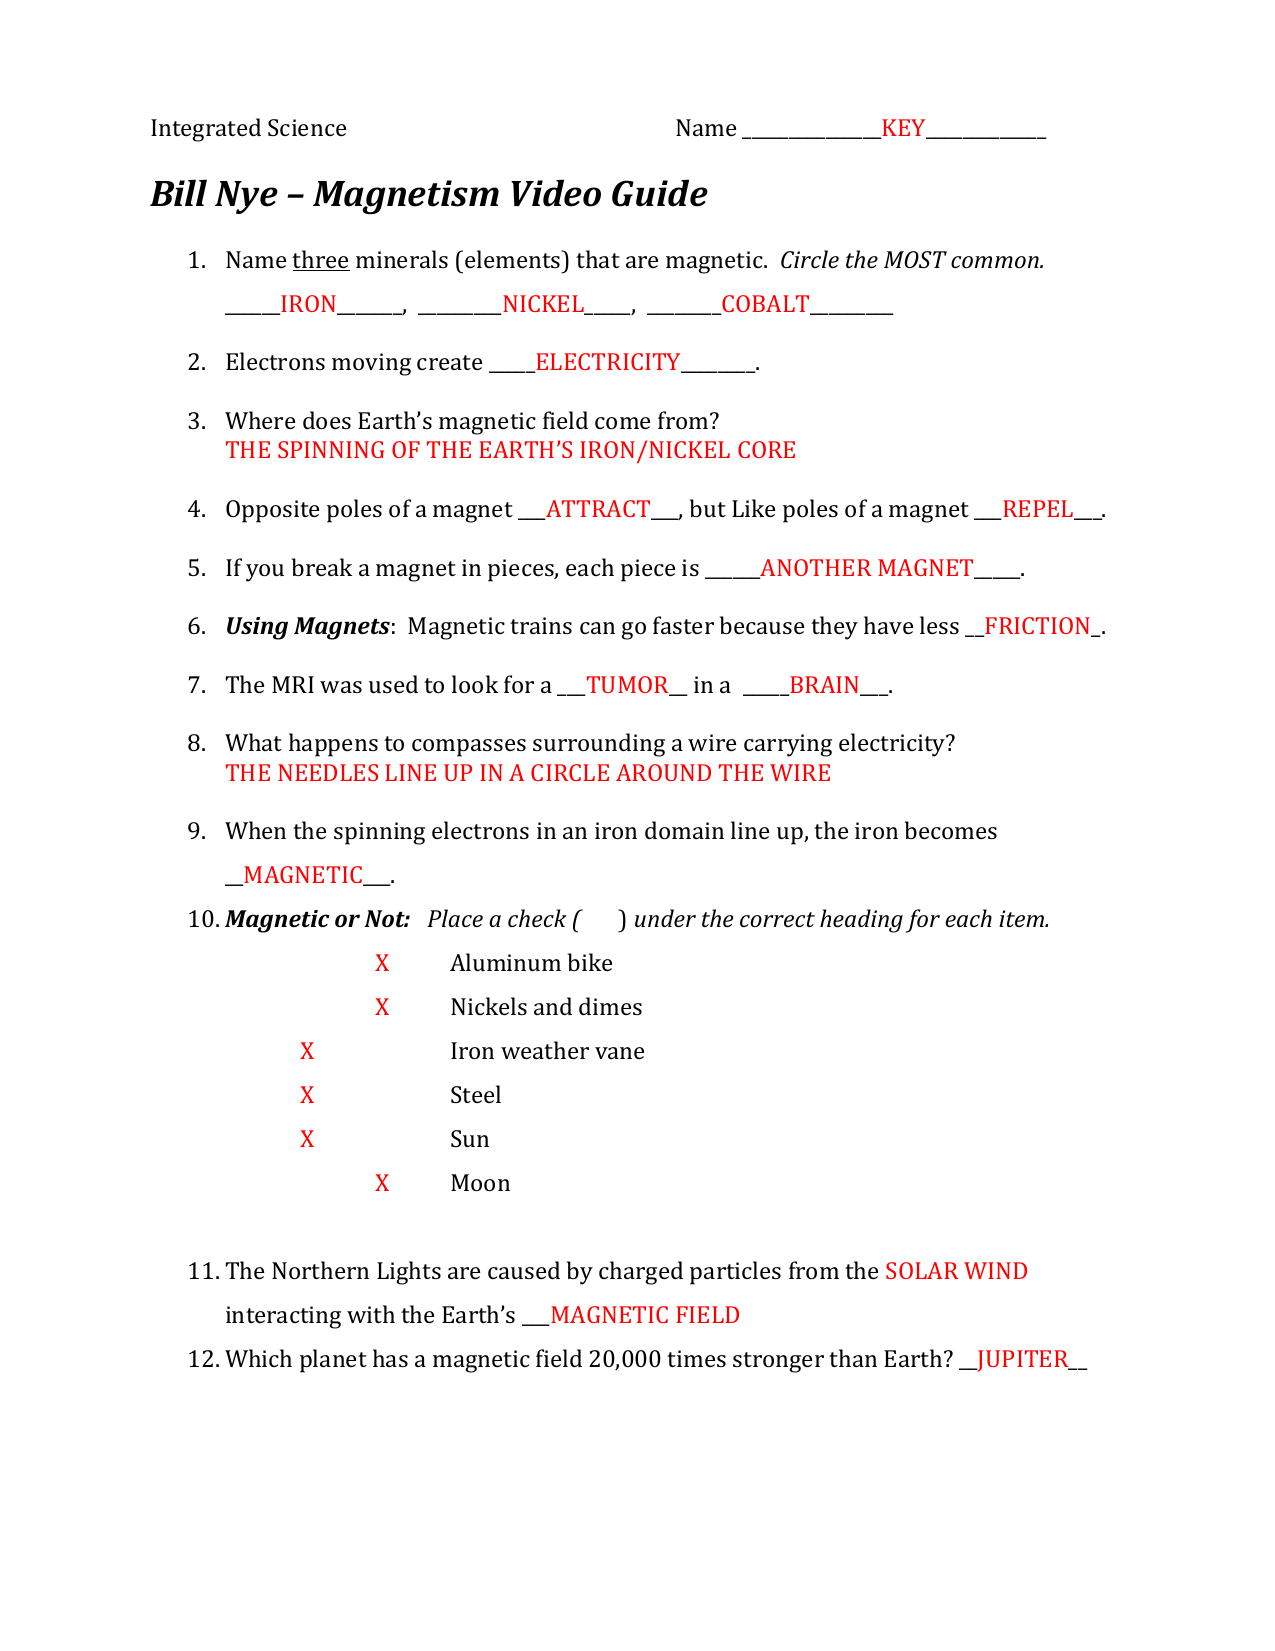 magnetism worksheet answers Cheaper Than Retail Price> Buy Pertaining To Bill Nye Magnetism Worksheet Answers